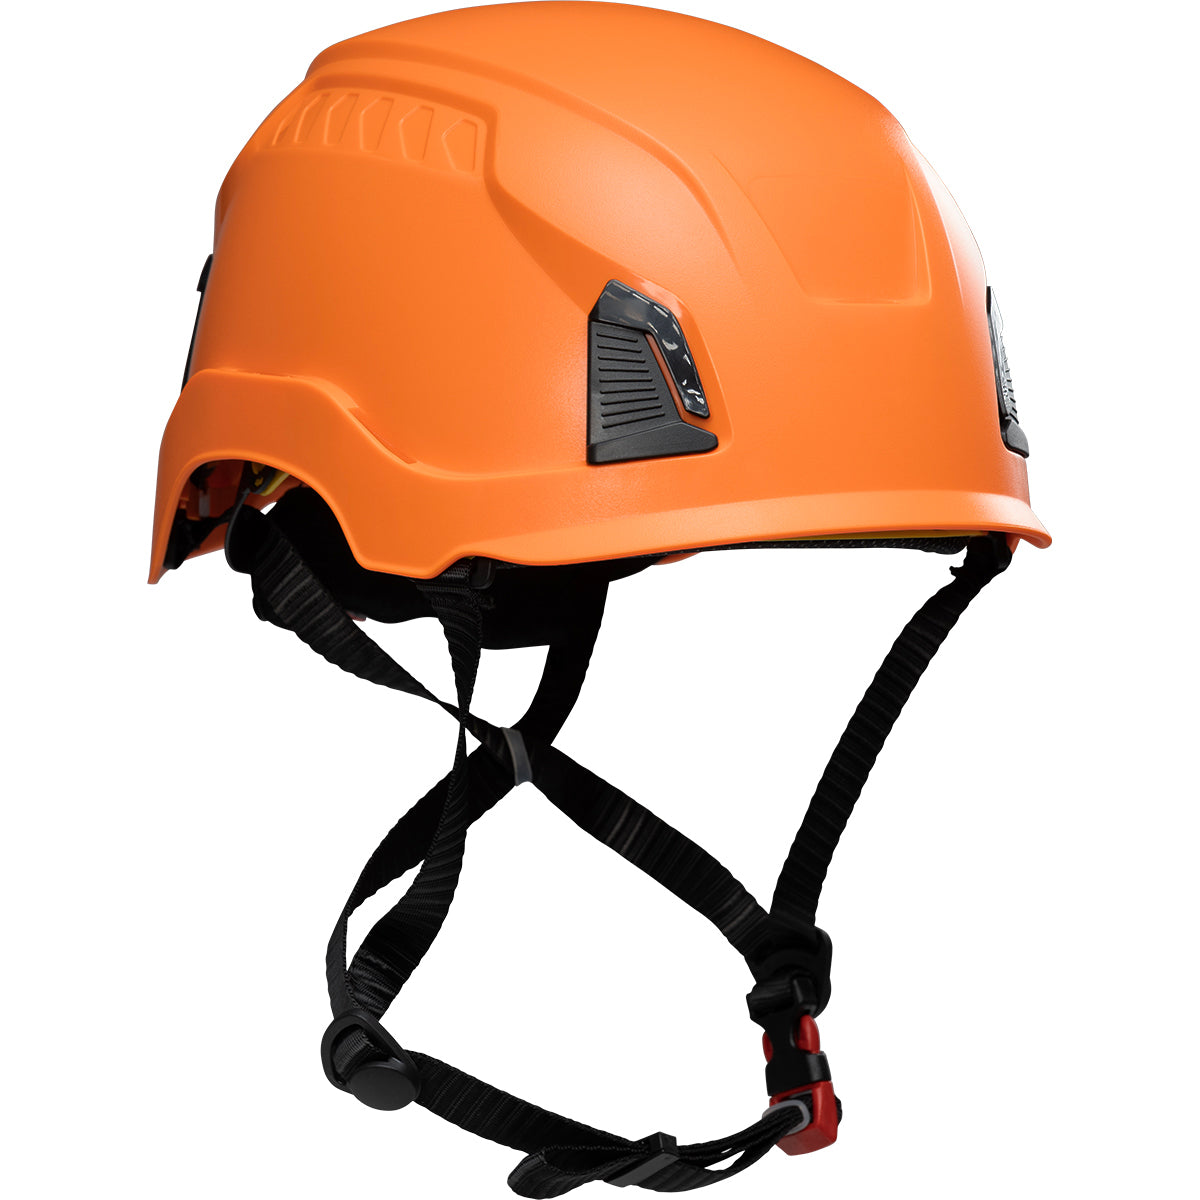 Traverse™ Industrial Climbing Helmet with Mips® Technology, ABS Shell, EPS Foam Impact Liner, HDPE Suspension, Wheel Ratchet Adjustment and 4-Point Chin Strap